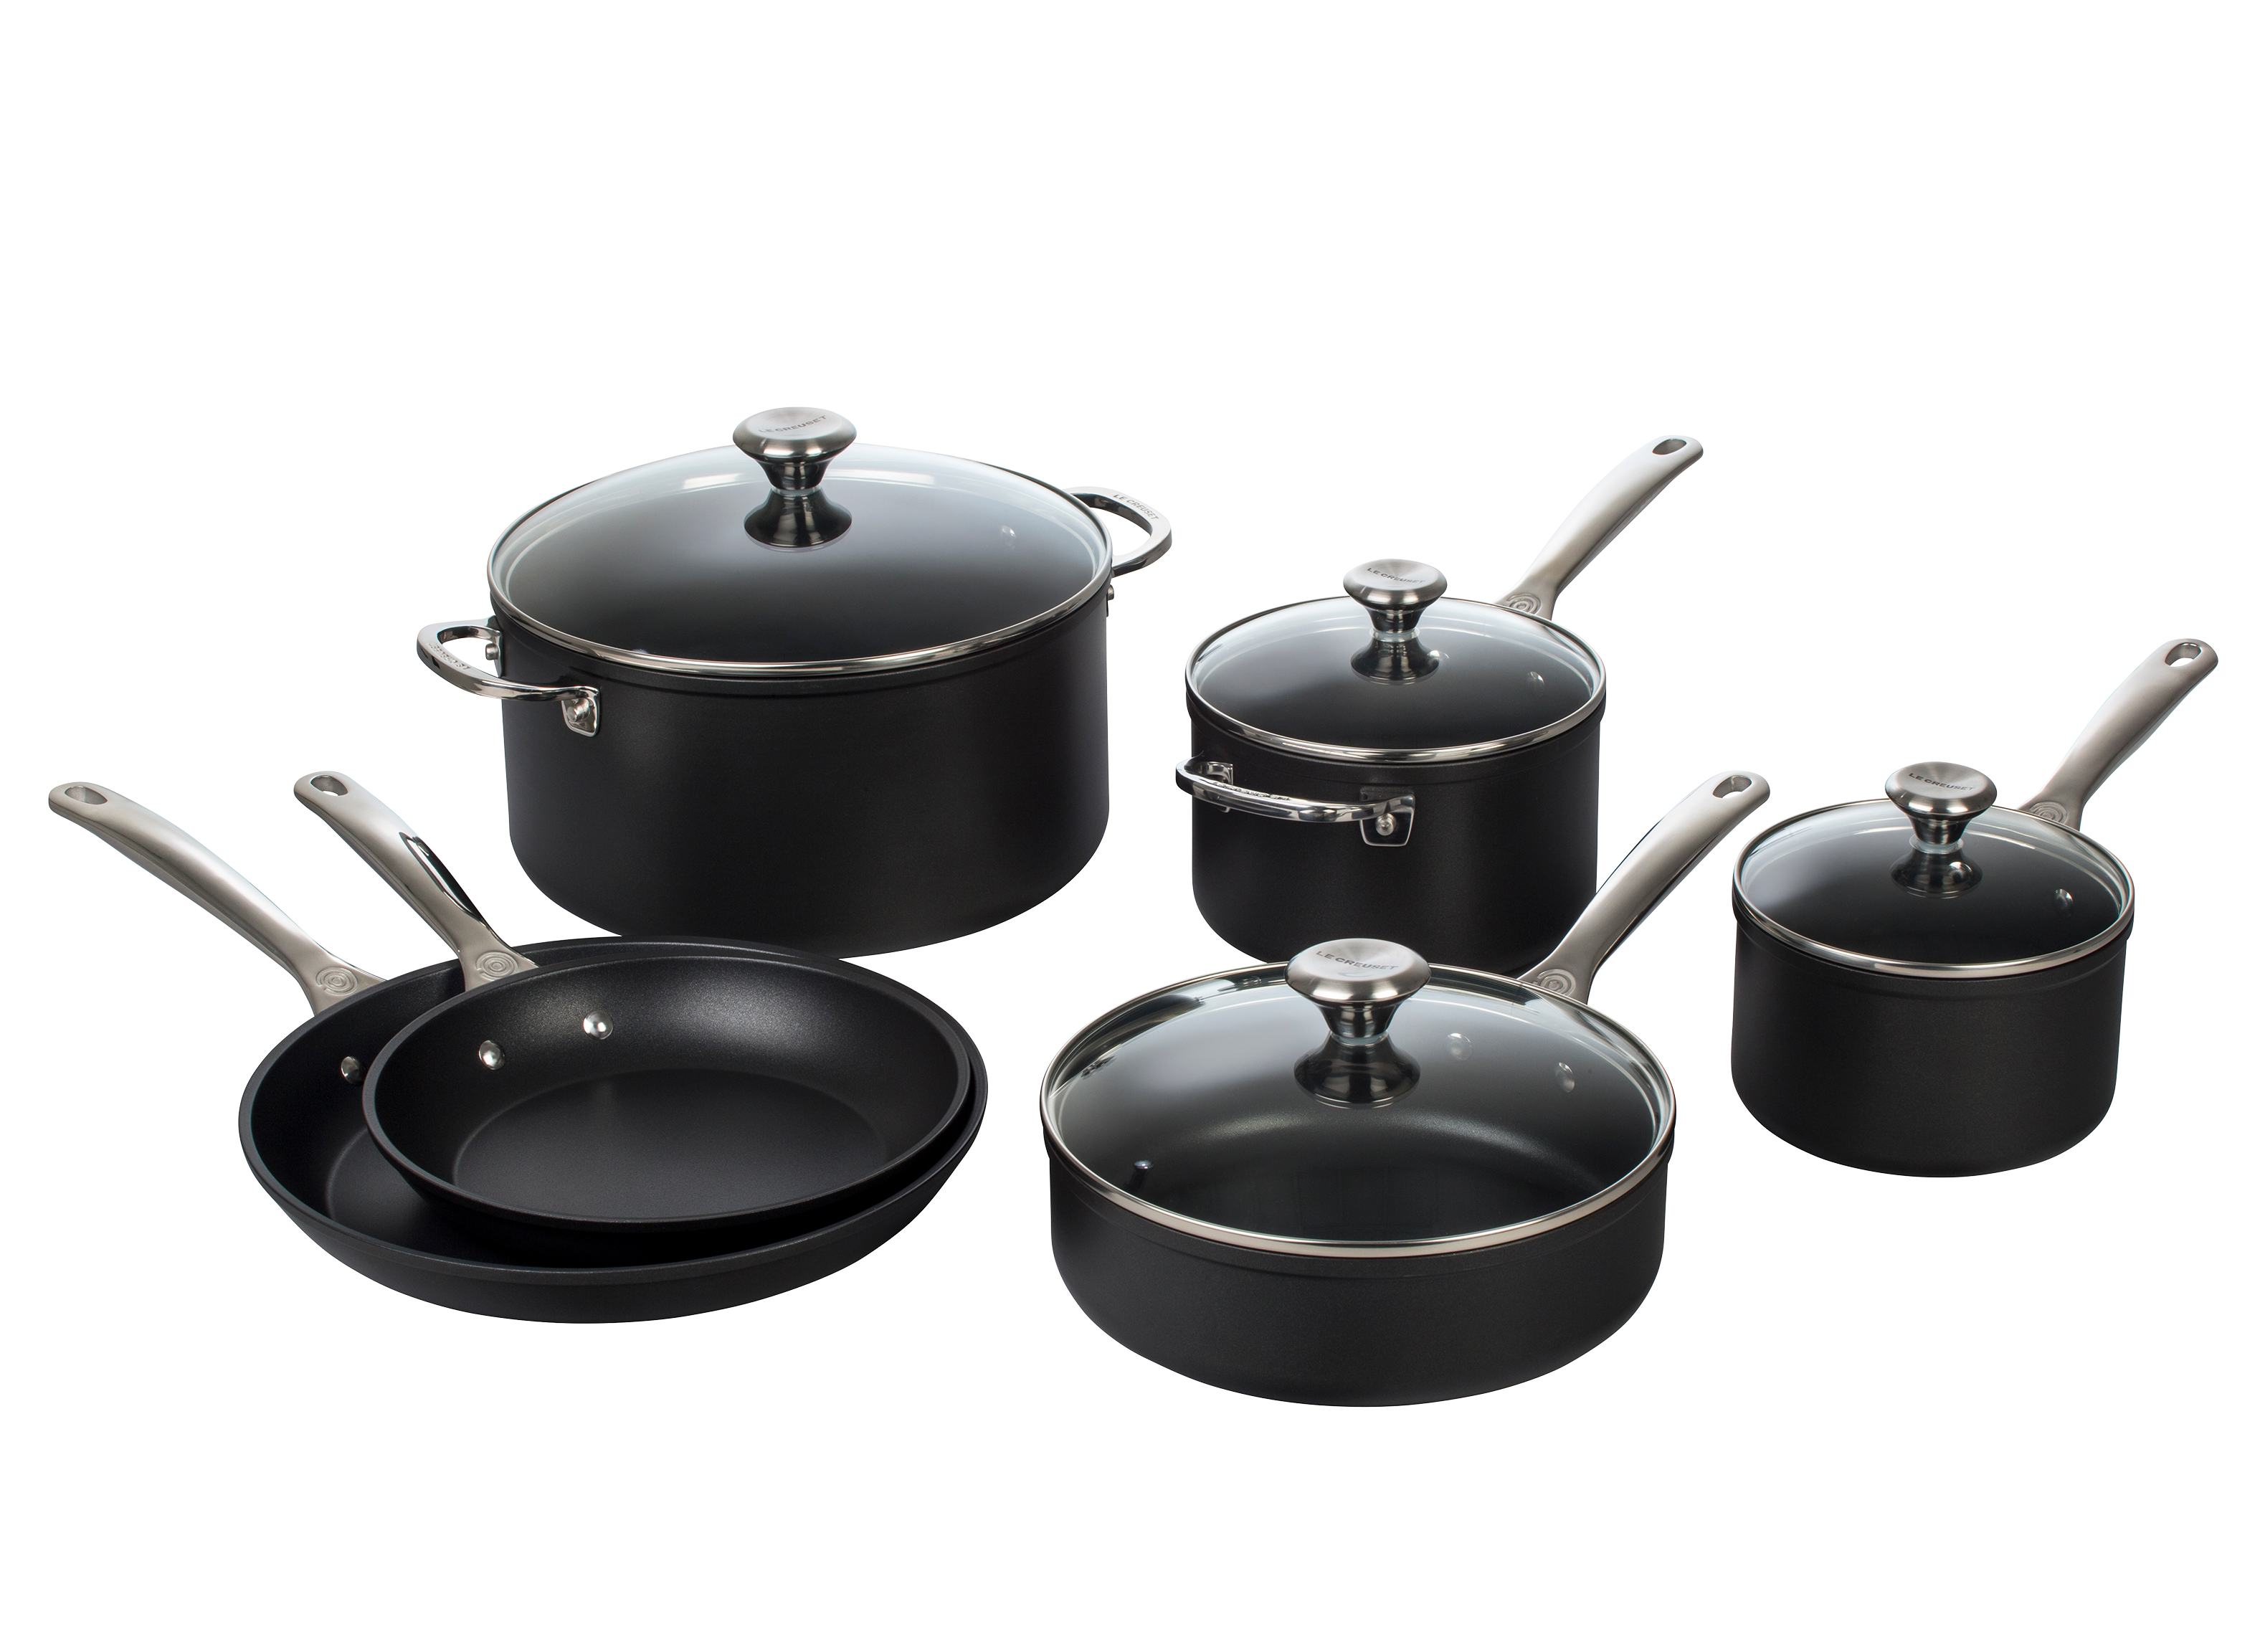 Le Creuset Toughened Pro Cookware - Consumer Reports